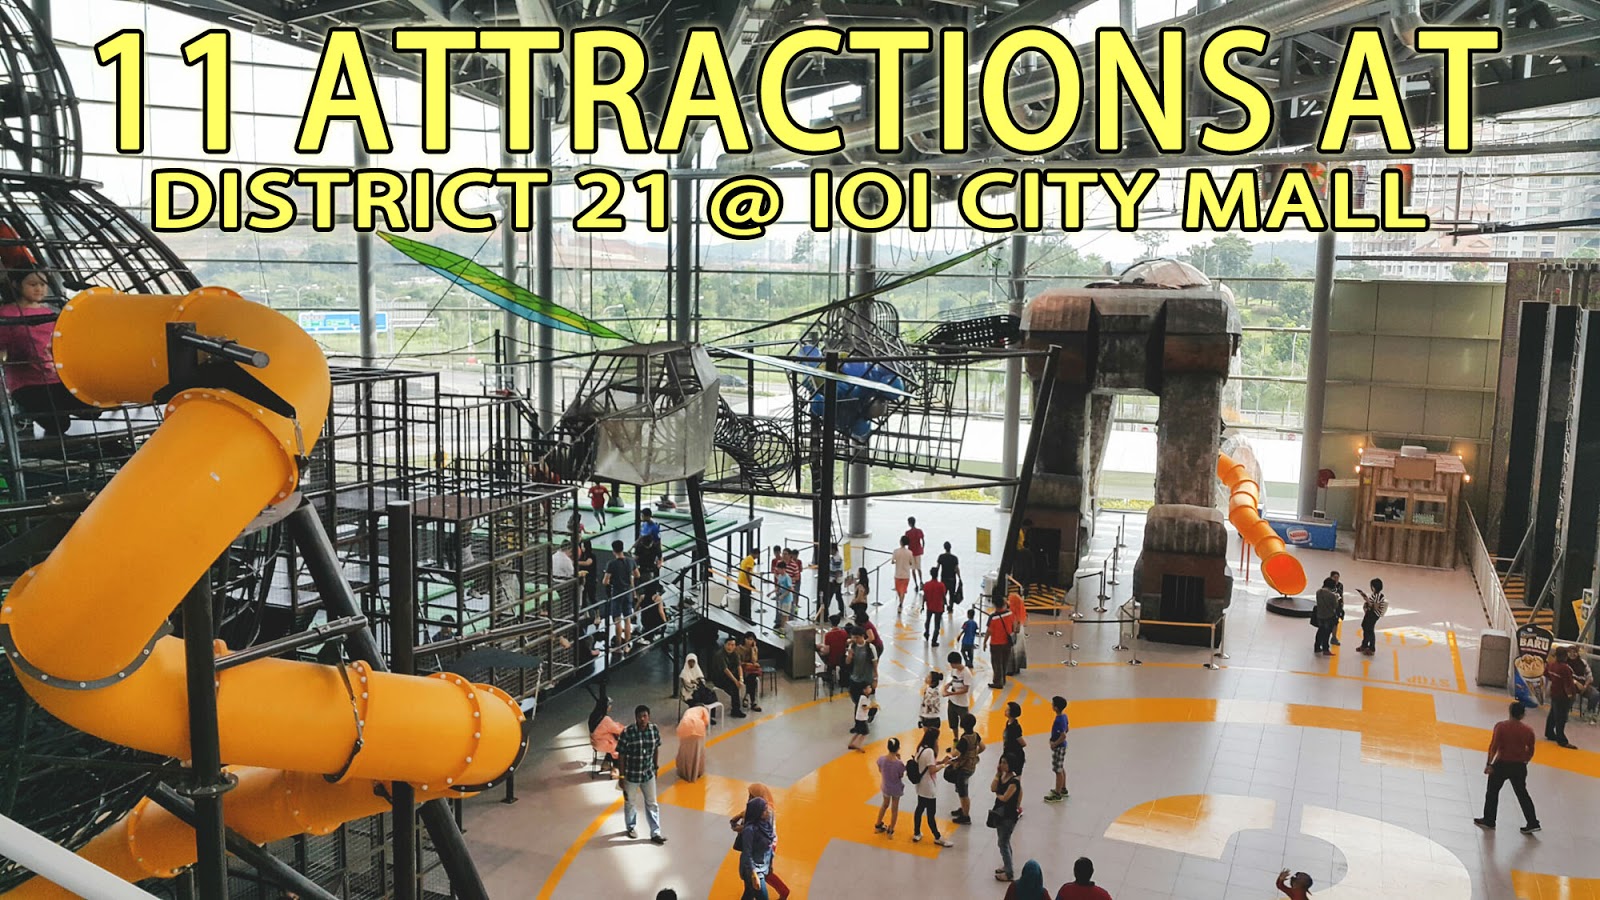 Ioi City Mall Karaoke : IOI City Mall | Glomedic Industries Sdn Bhd - Ioi city mall, a brand new lifestyle and entertainment regional mall for all.